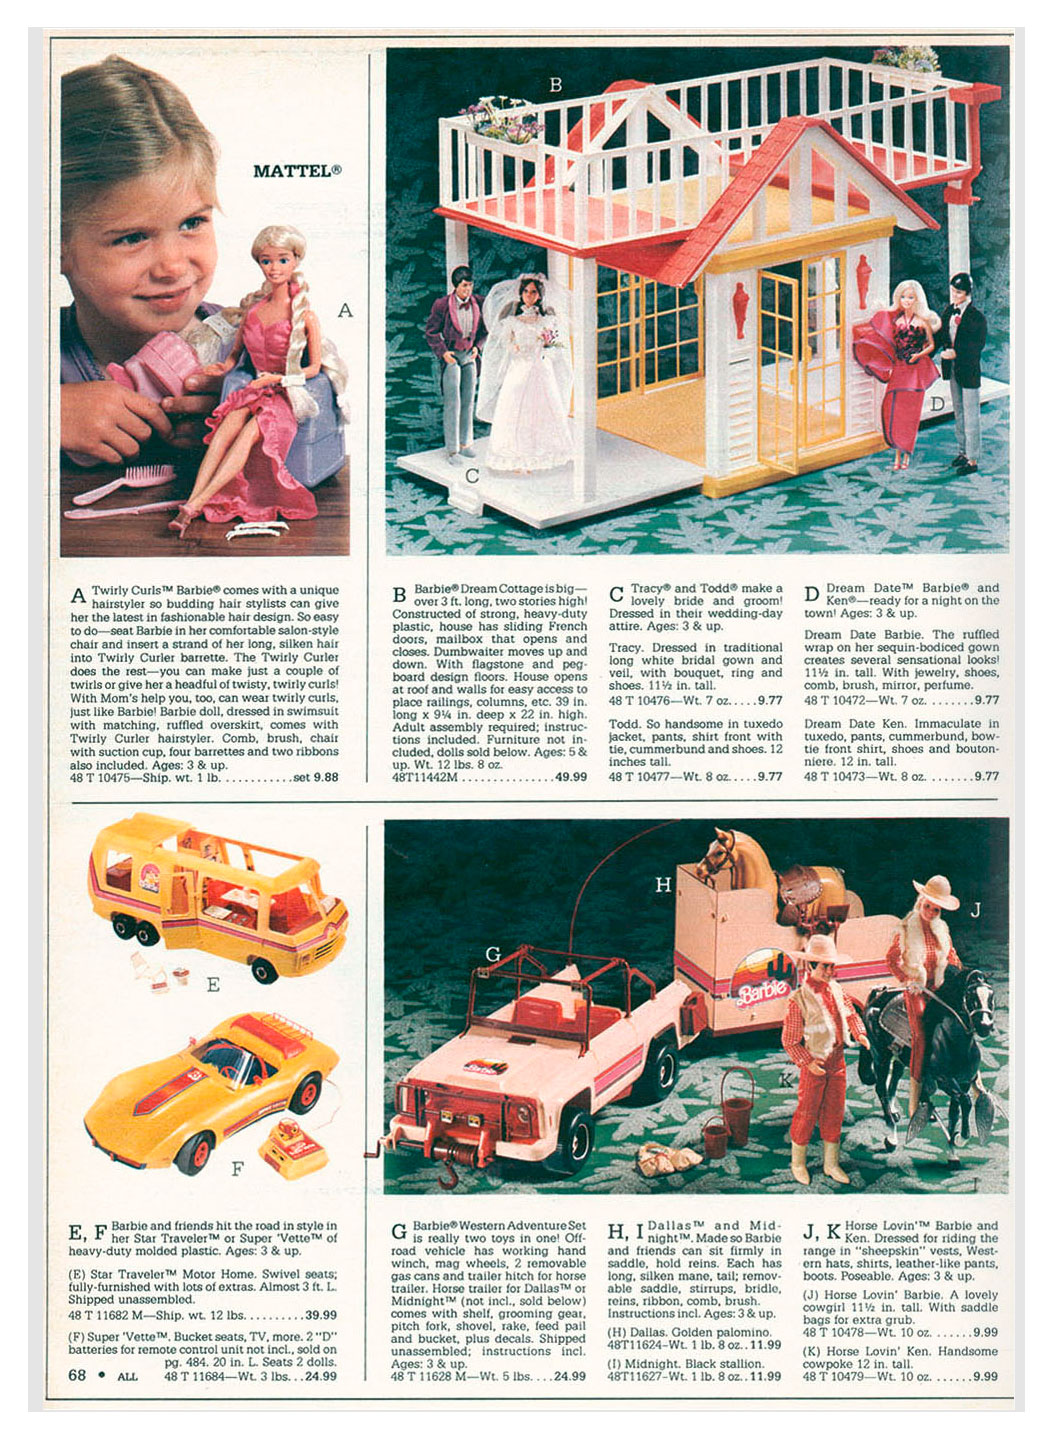 From 1983 Montgomery Ward Christmas catalogue